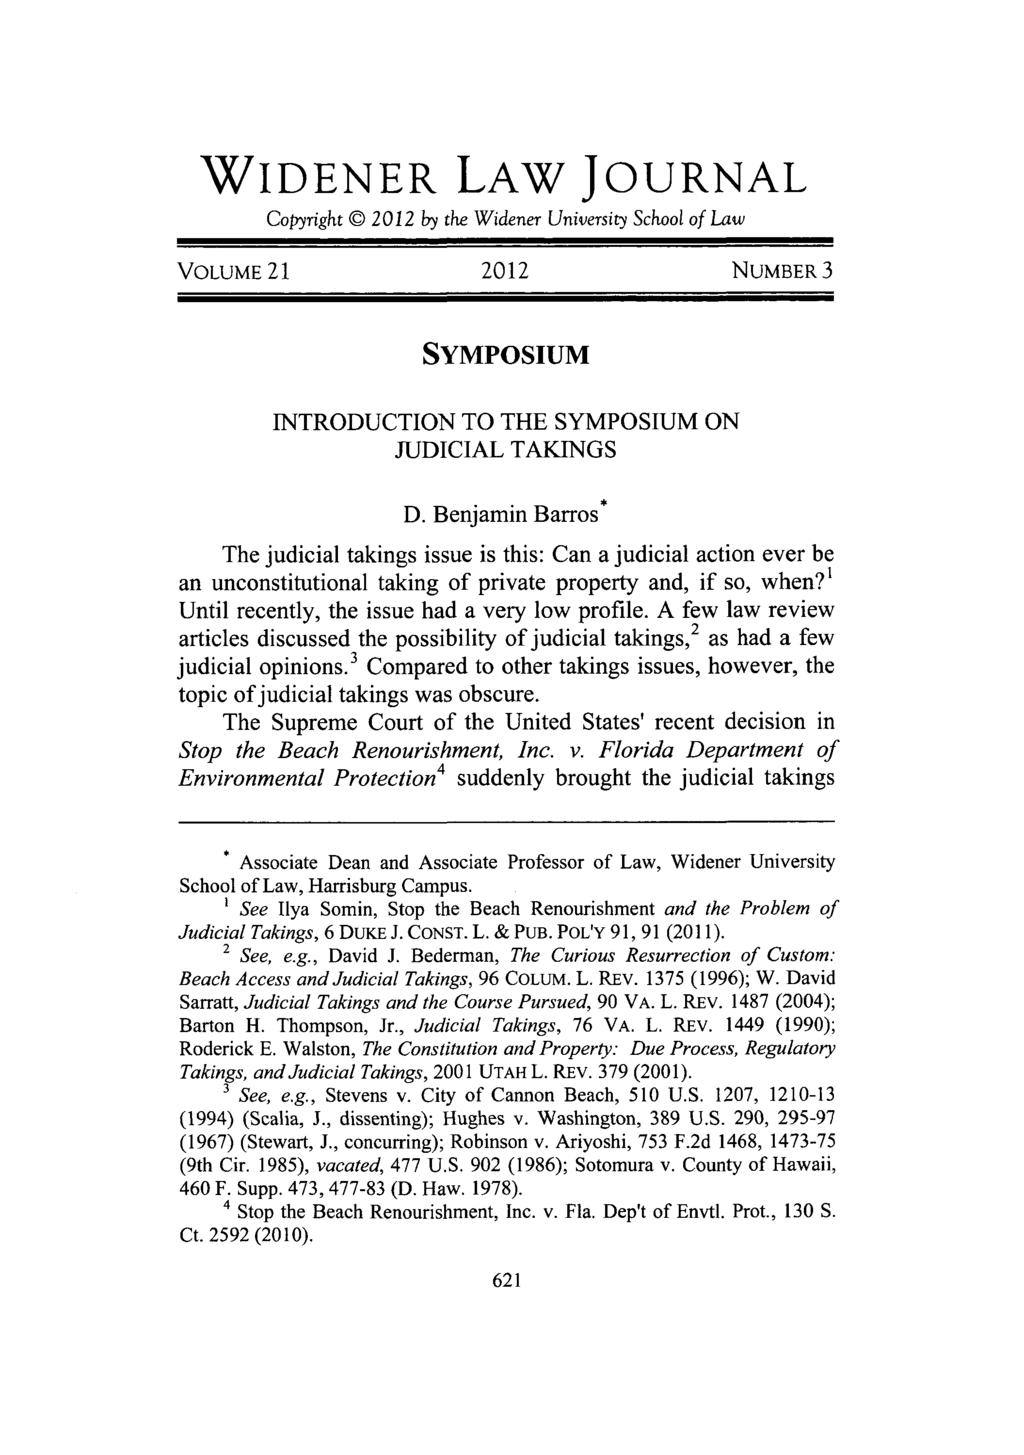 WIDENER LAW JOURNAL Copyright 0 2012 by the Widener University School of Law VOLUME 21 2012 NUMBER 3 SYMPosIUM INTRODUCTION TO THE SYMPOSIUM ON JUDICIAL TAKINGS D.